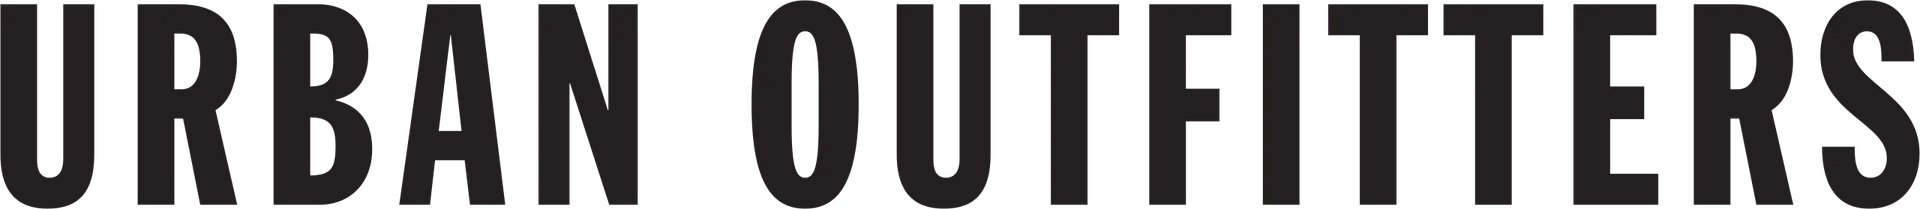 URBAN OUTFITTERS logo